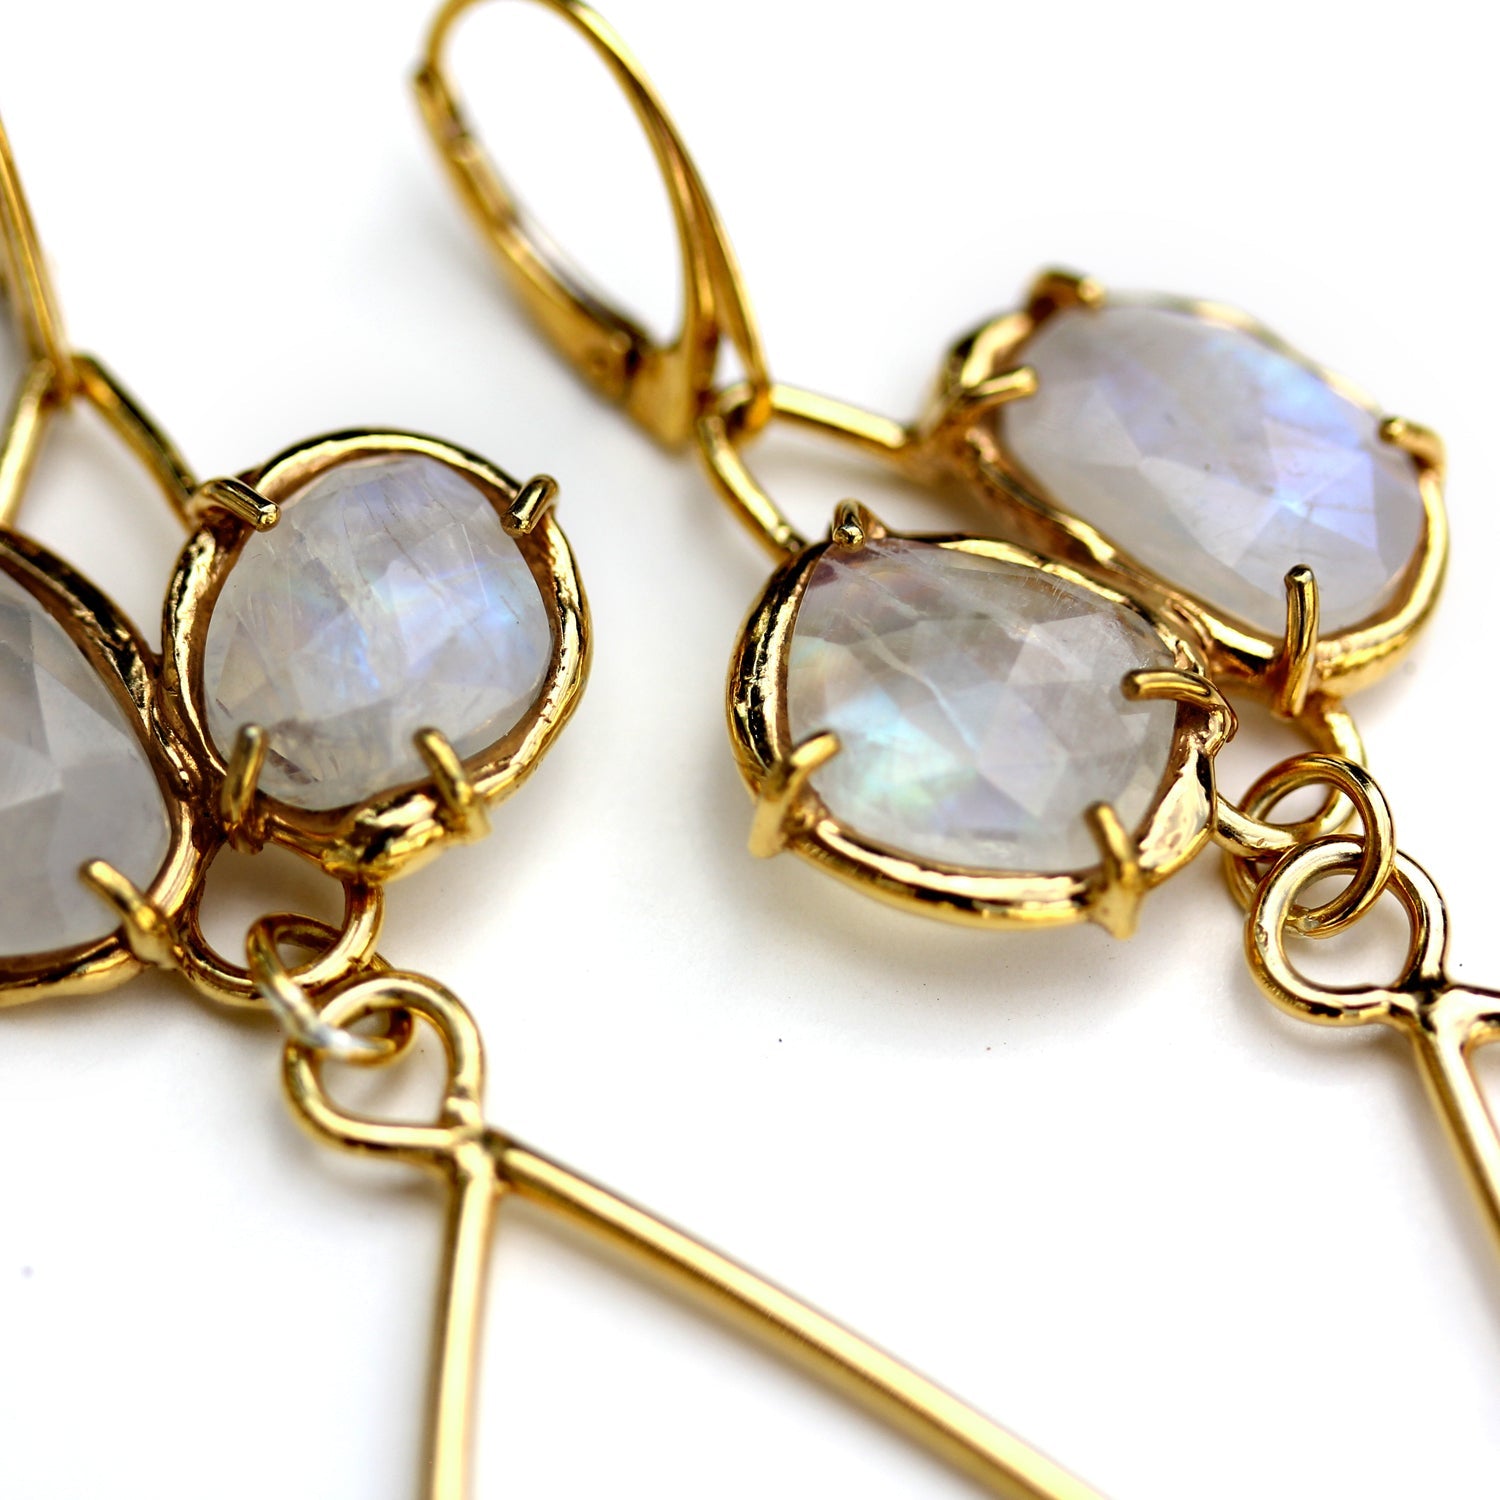 Handmade Adele Earrings in Gold Plated Sterling with Moonstone by Katie Poterala Jewelry -- Detail